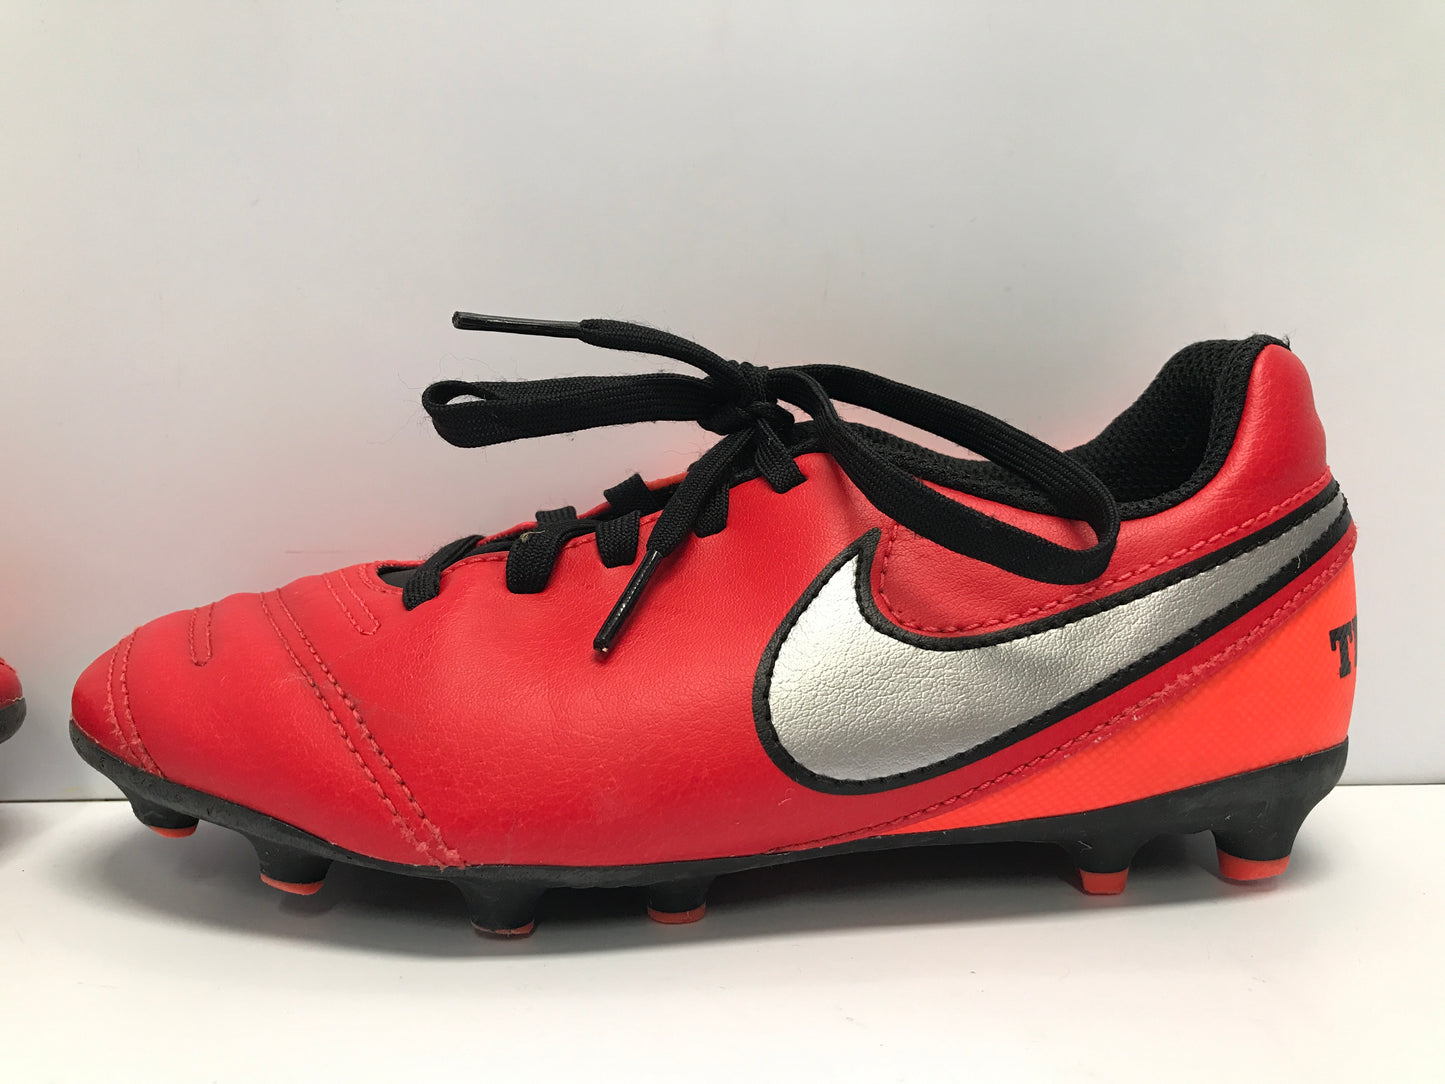 Soccer Shoes Cleats Child Size 1 Nike Tiempo Red Black Tangerine